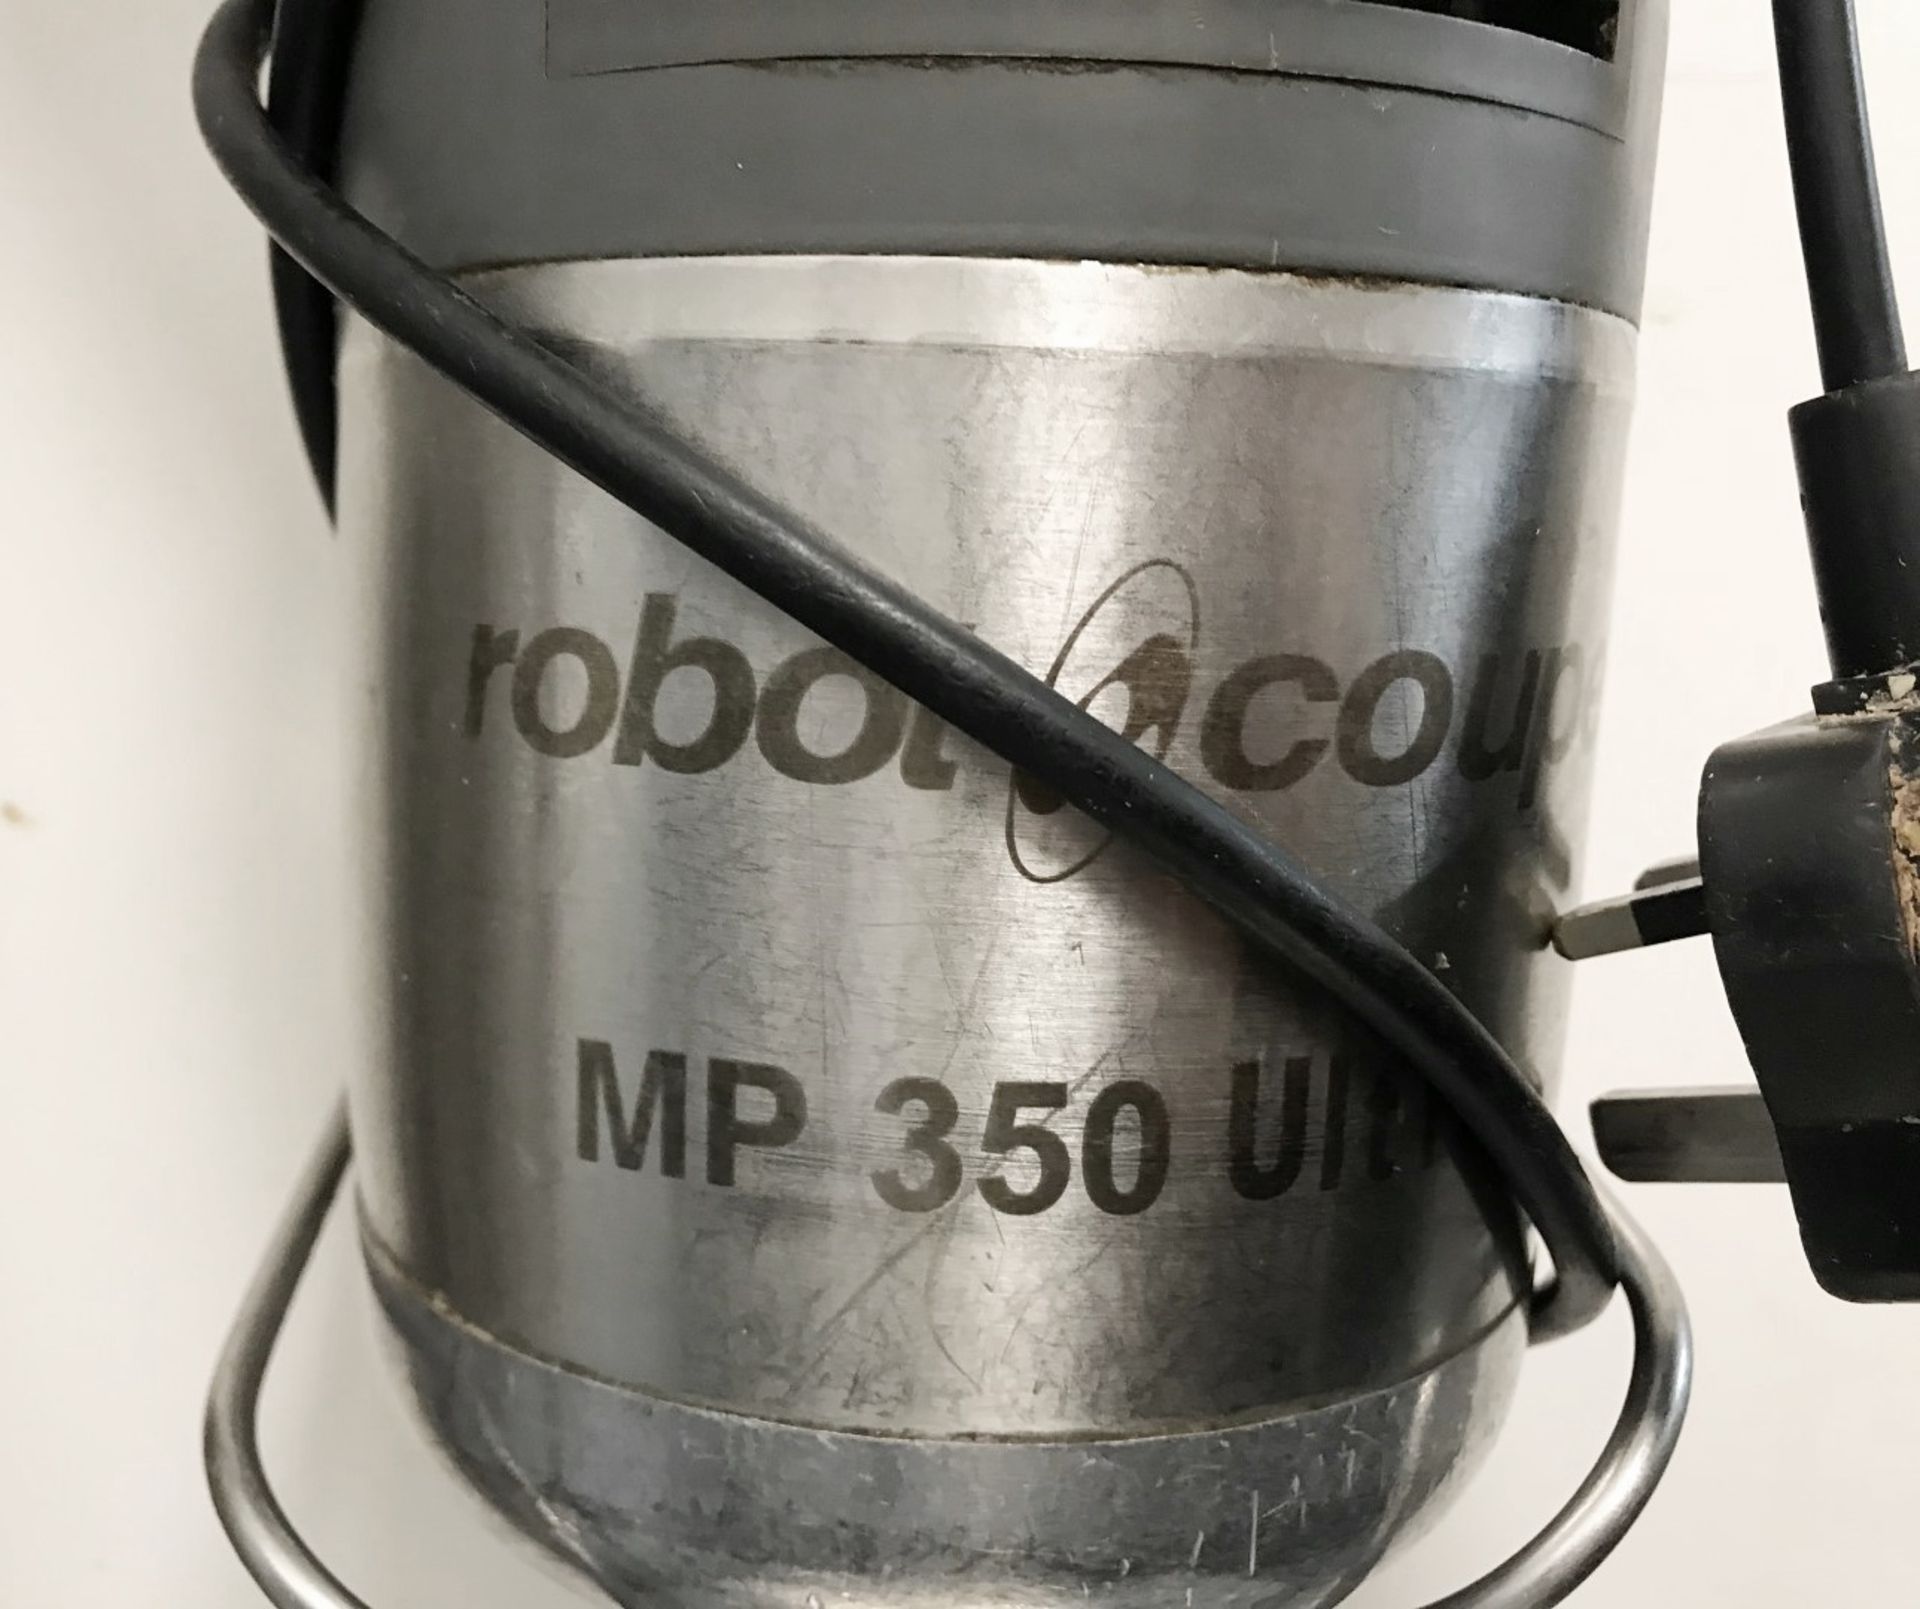 1 x Robot Coupe MP350 Food Mixer - CL554 - Ref IM - Location: Altrincham WA14 - Image 3 of 3